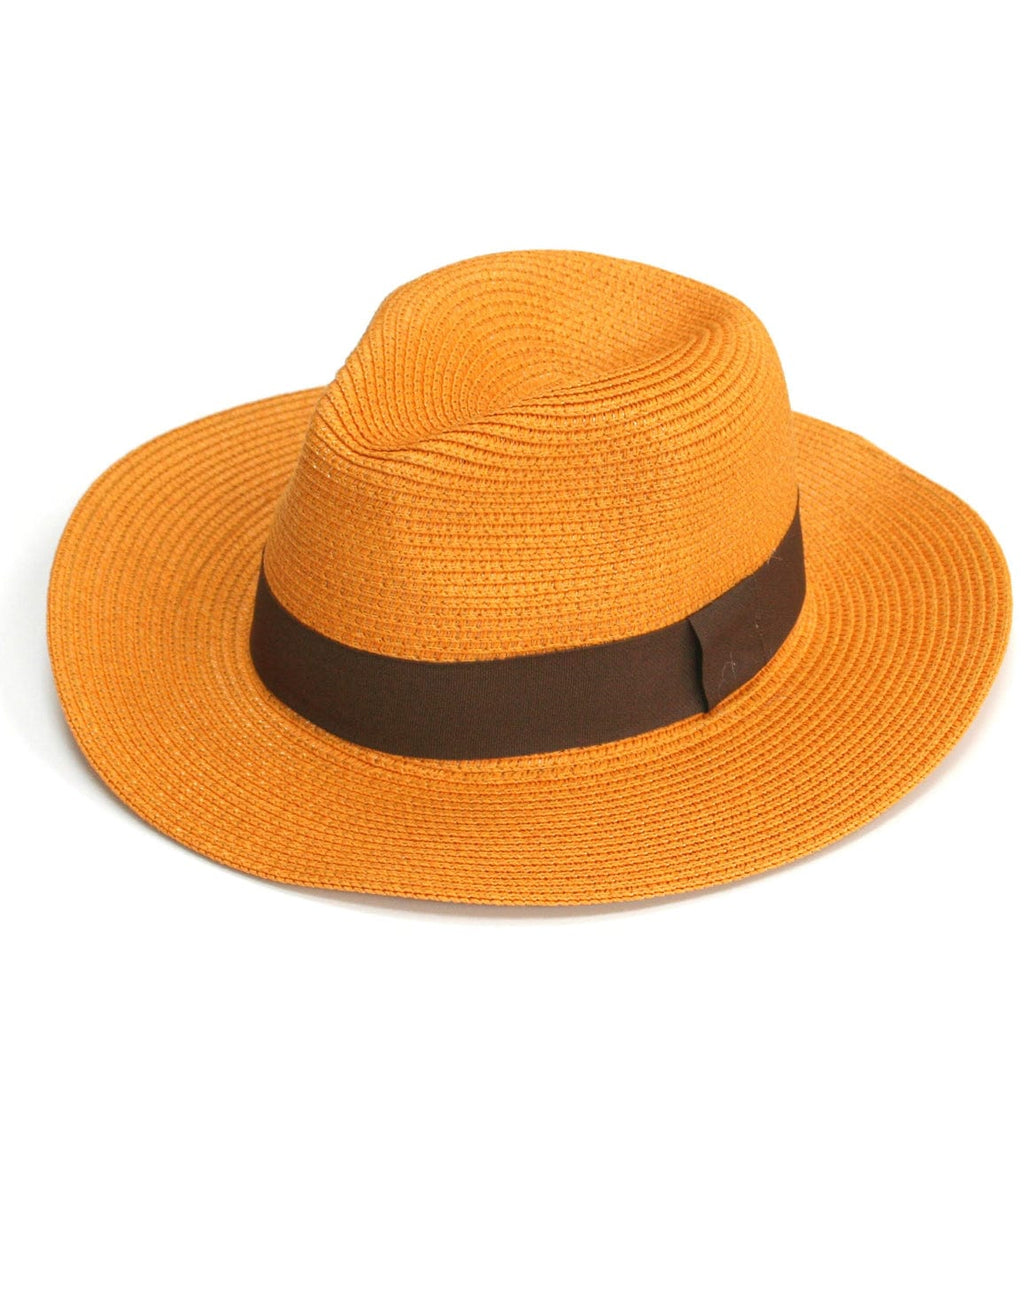 lusciousscarves Hats Mustard Yellow foldable Panama hat , Rollable , packable Sun hat